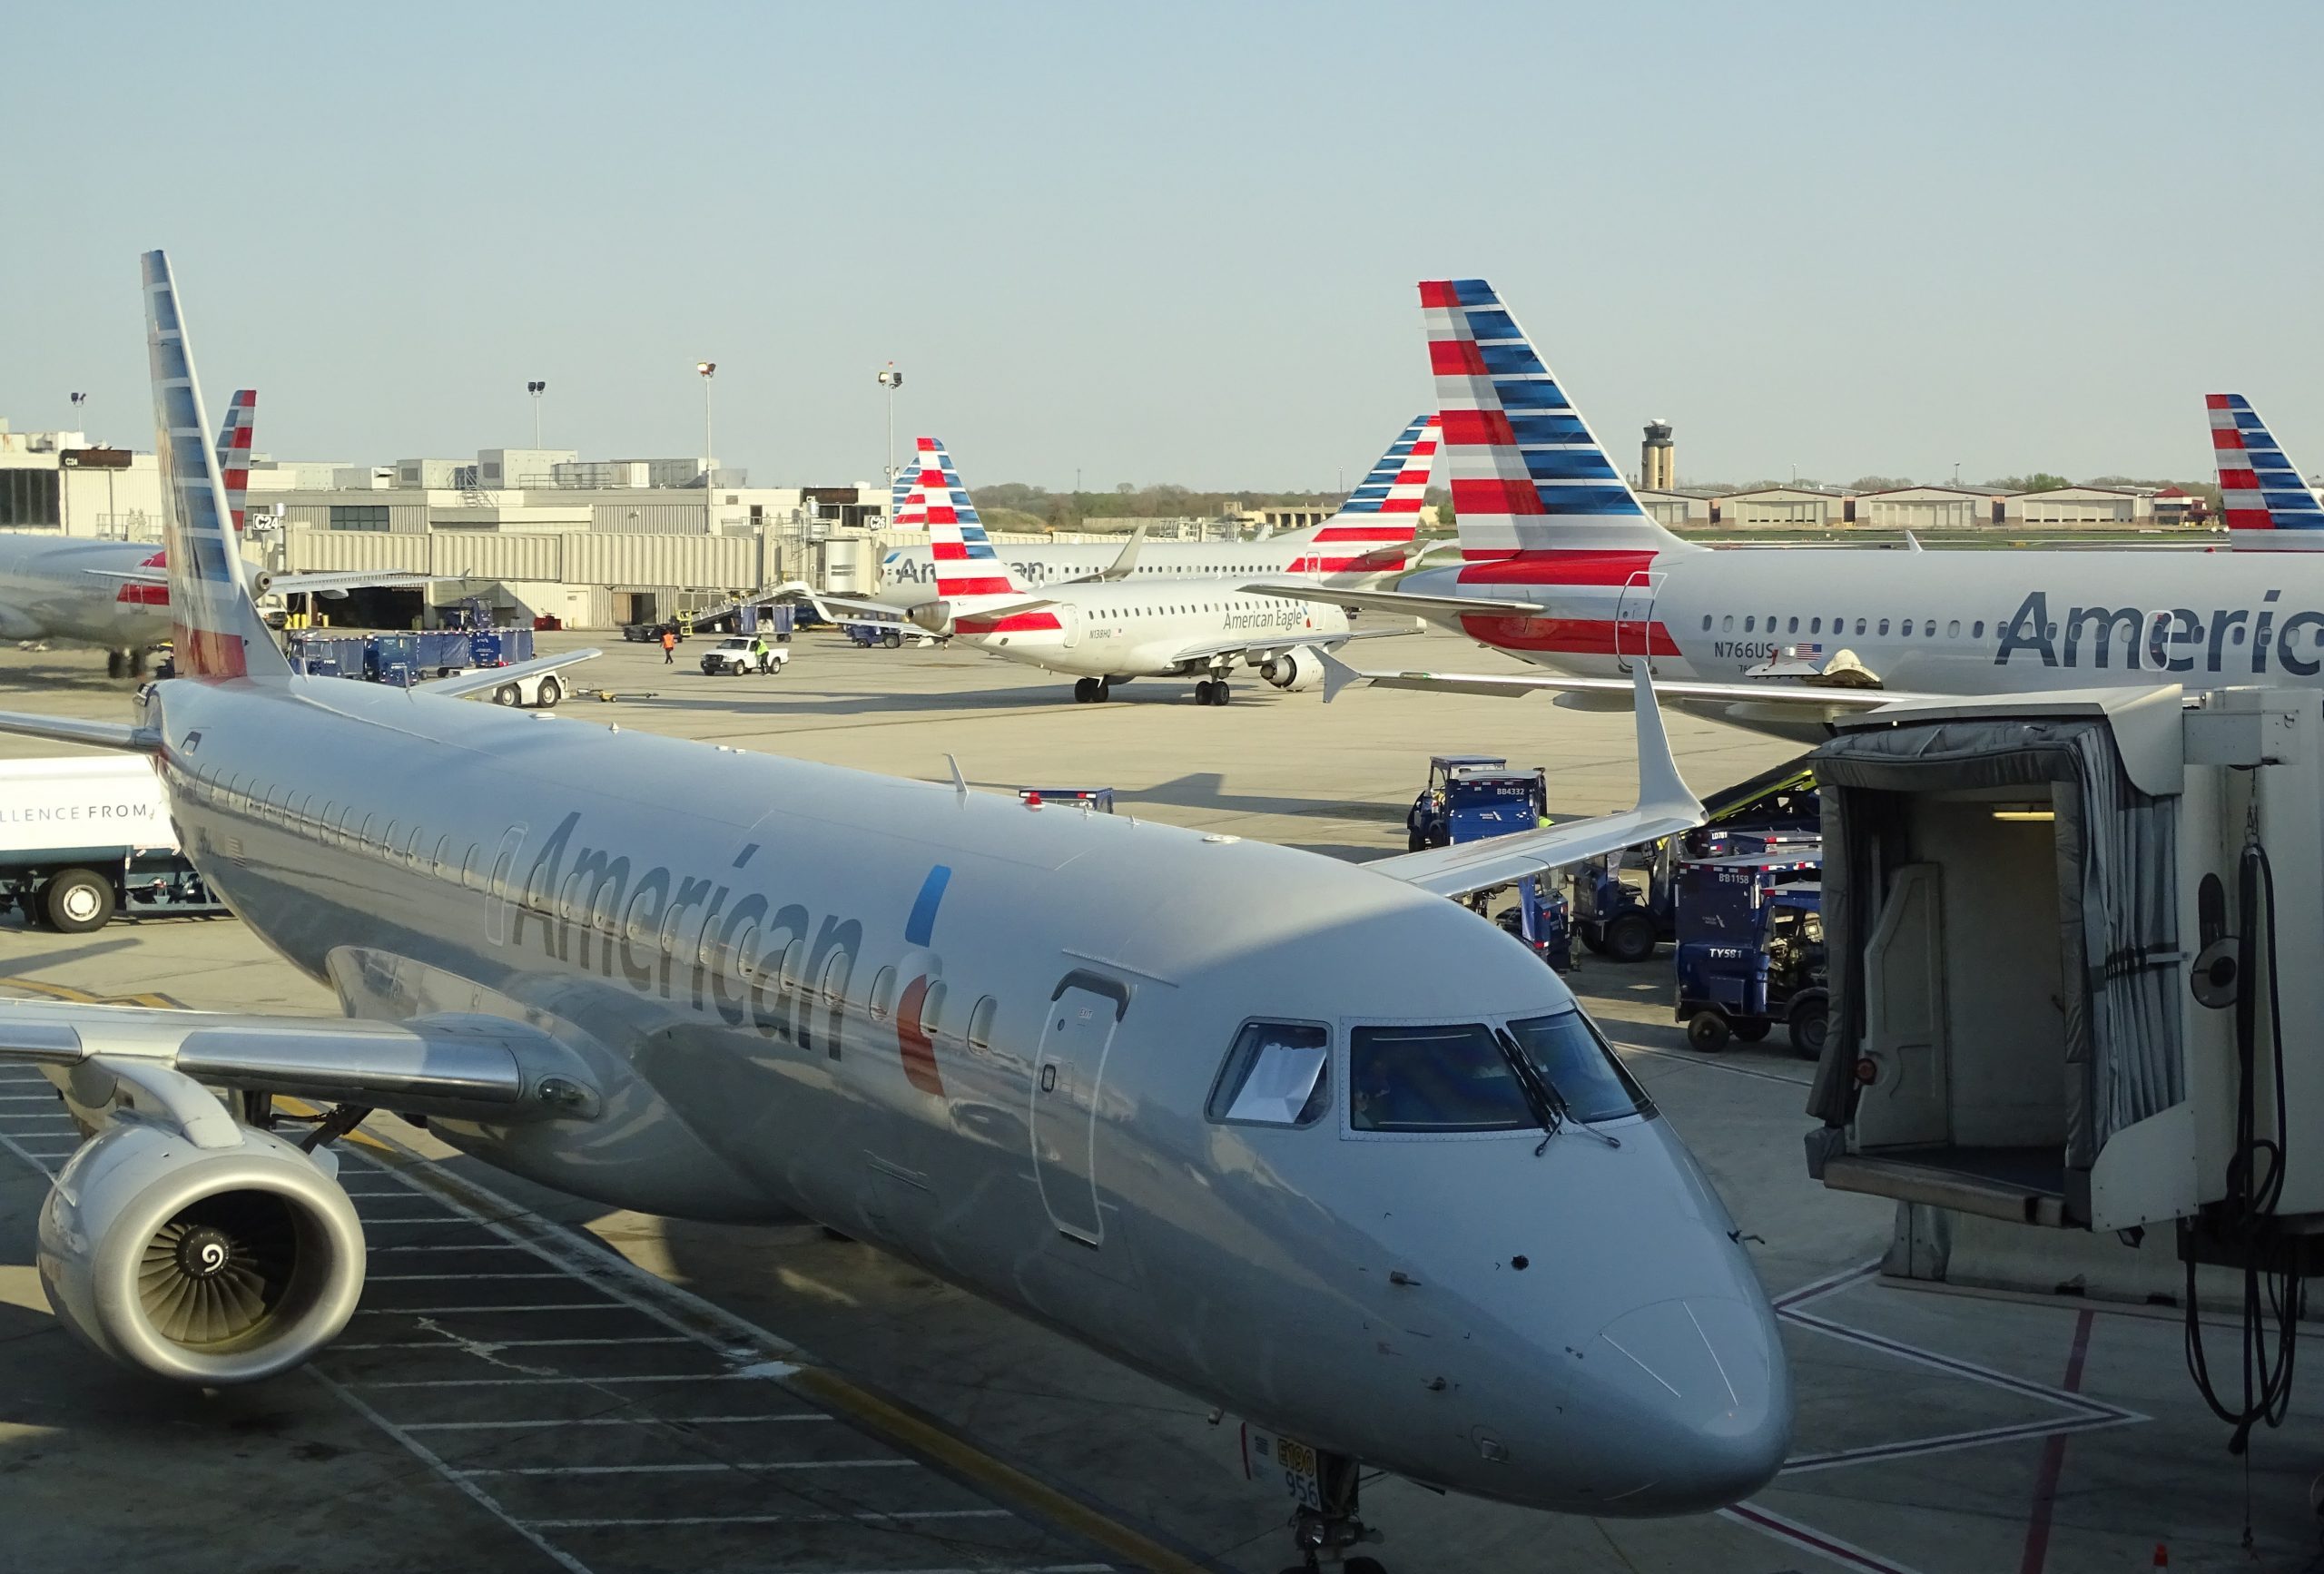 American Airlines Ground Worker Reportedly Killed in Horrific Accident After Bei..